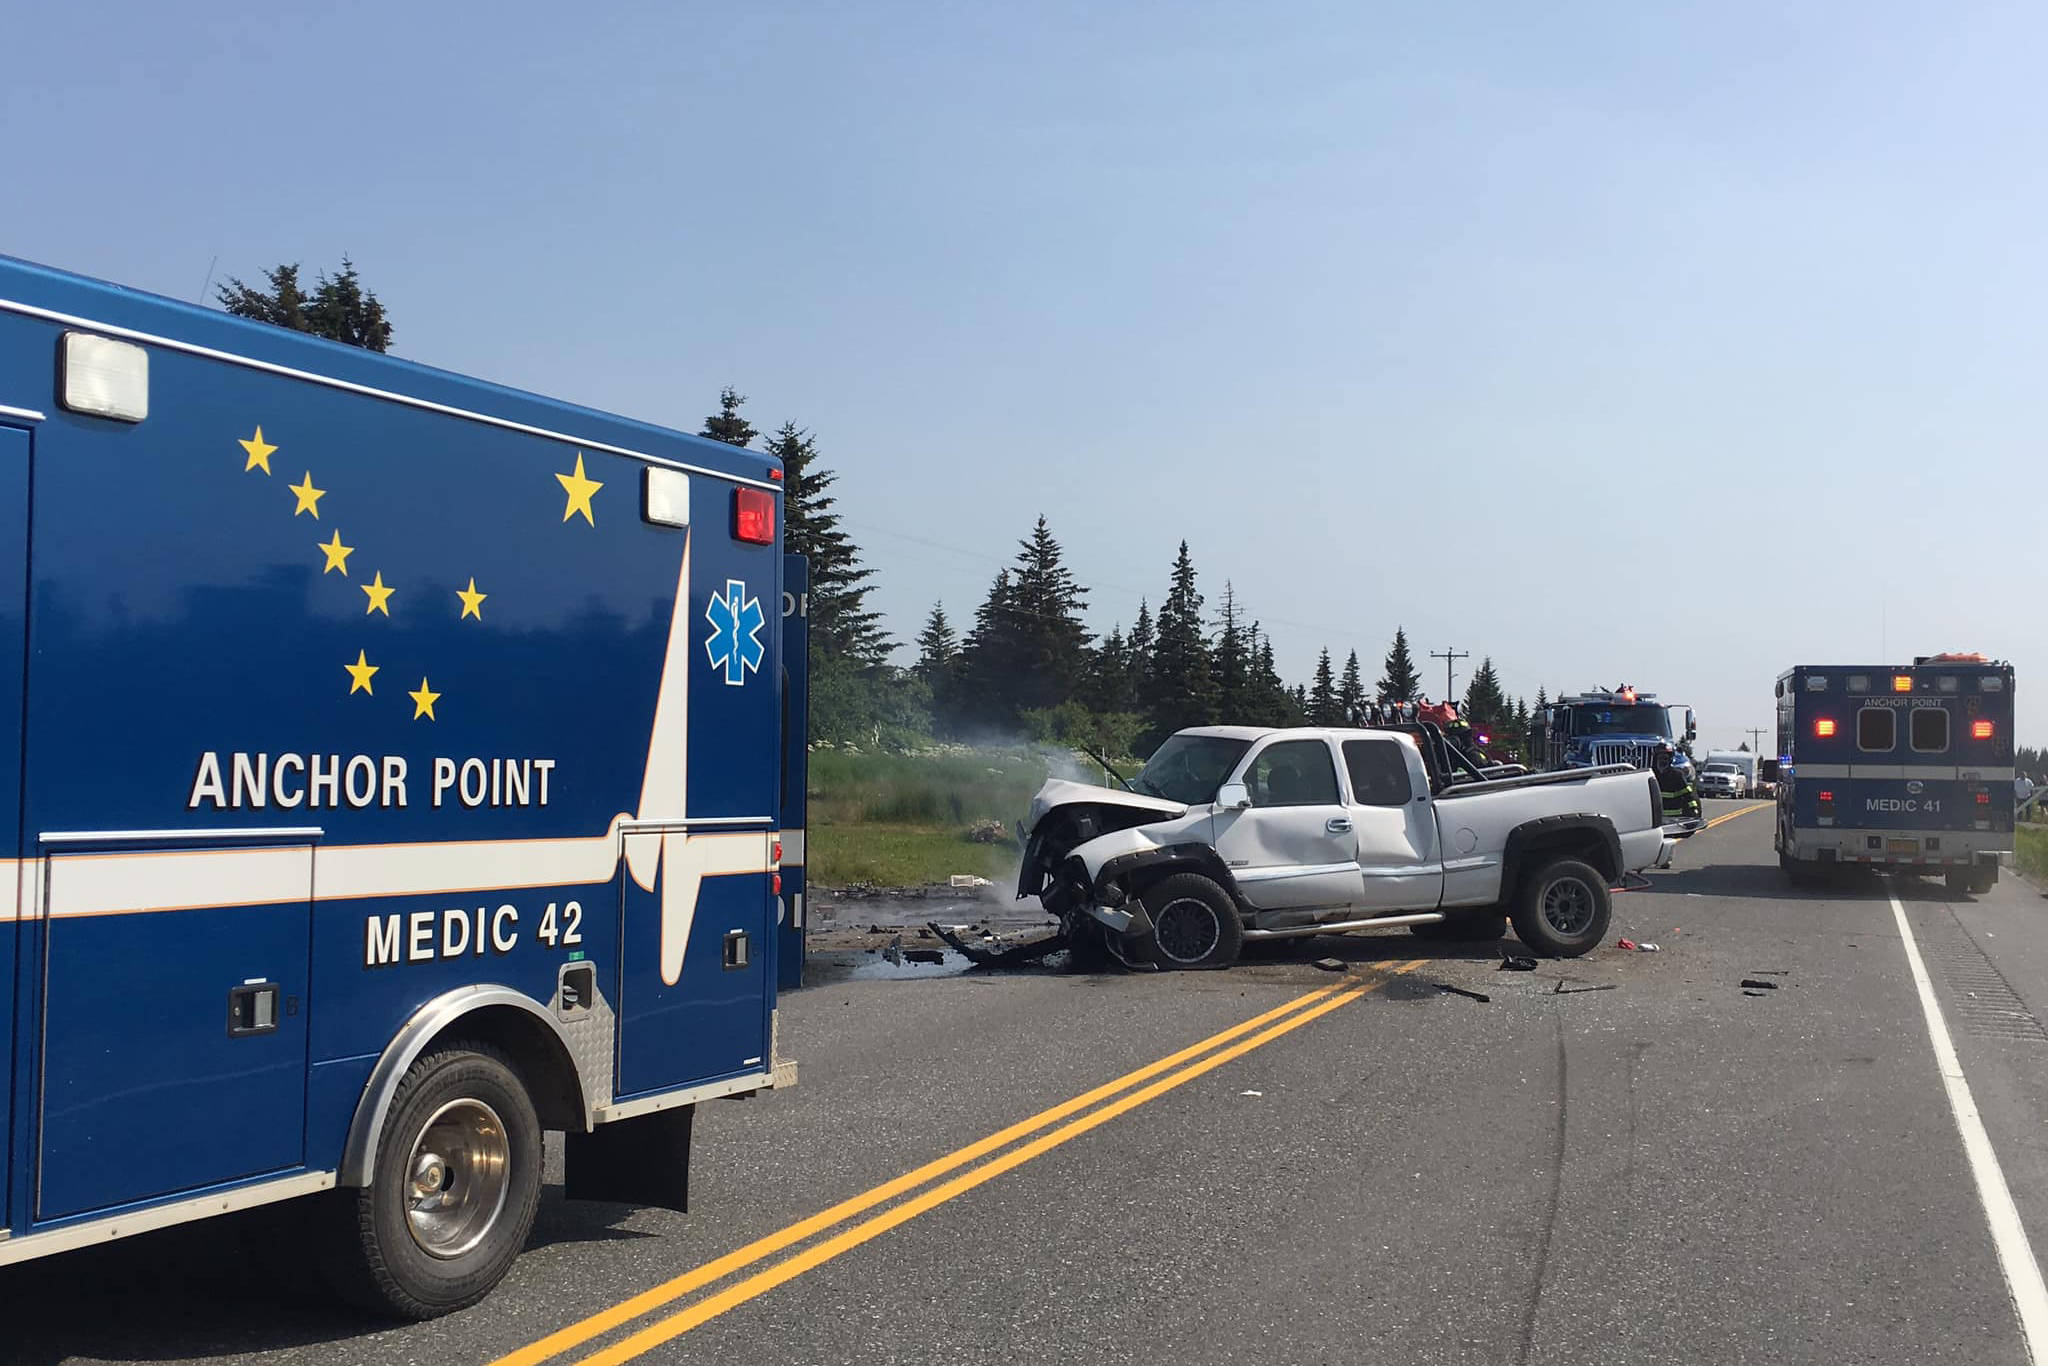 A pickup truck involved in a fatal car crash on July 7, 2019, rests on the side of the road near Mile 142 Sterling Highway, Happy Valley, Alaska. The pickup truck driver survived, but the driver of a second car involved in the crash, Michael Franklin, 18, of Homer, Alaska, died of his injuries. (Photo by Jon Marsh/Anchor Point Fire and EMS)